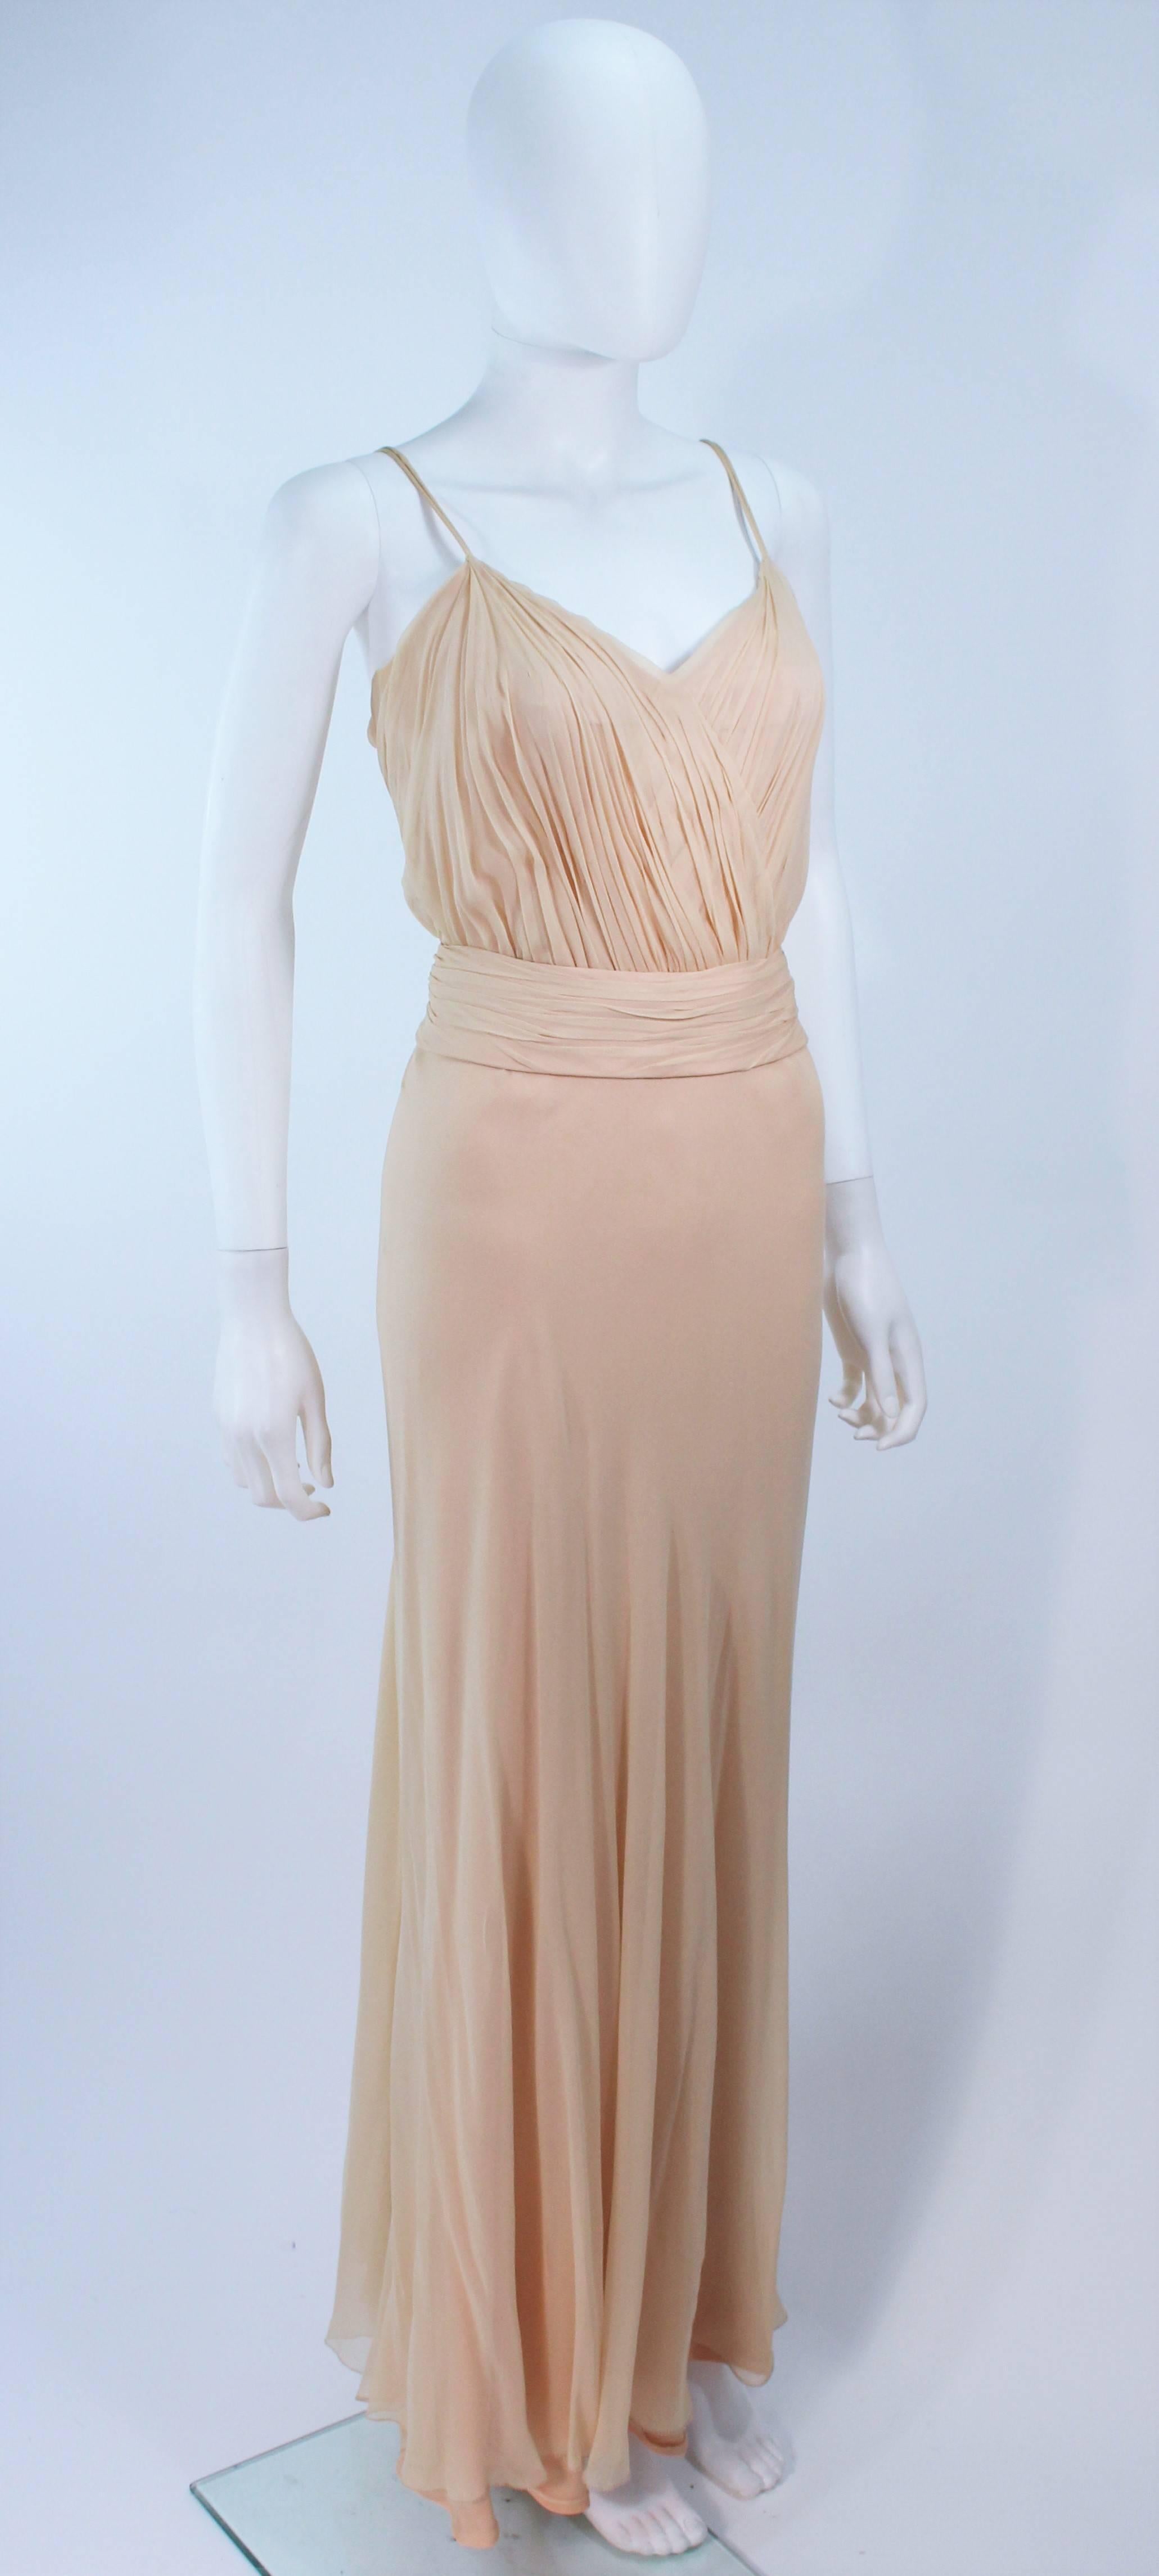 CEIL CHAPMAN Nude Chiffon Draped Gown Size 2 4 For Sale 1